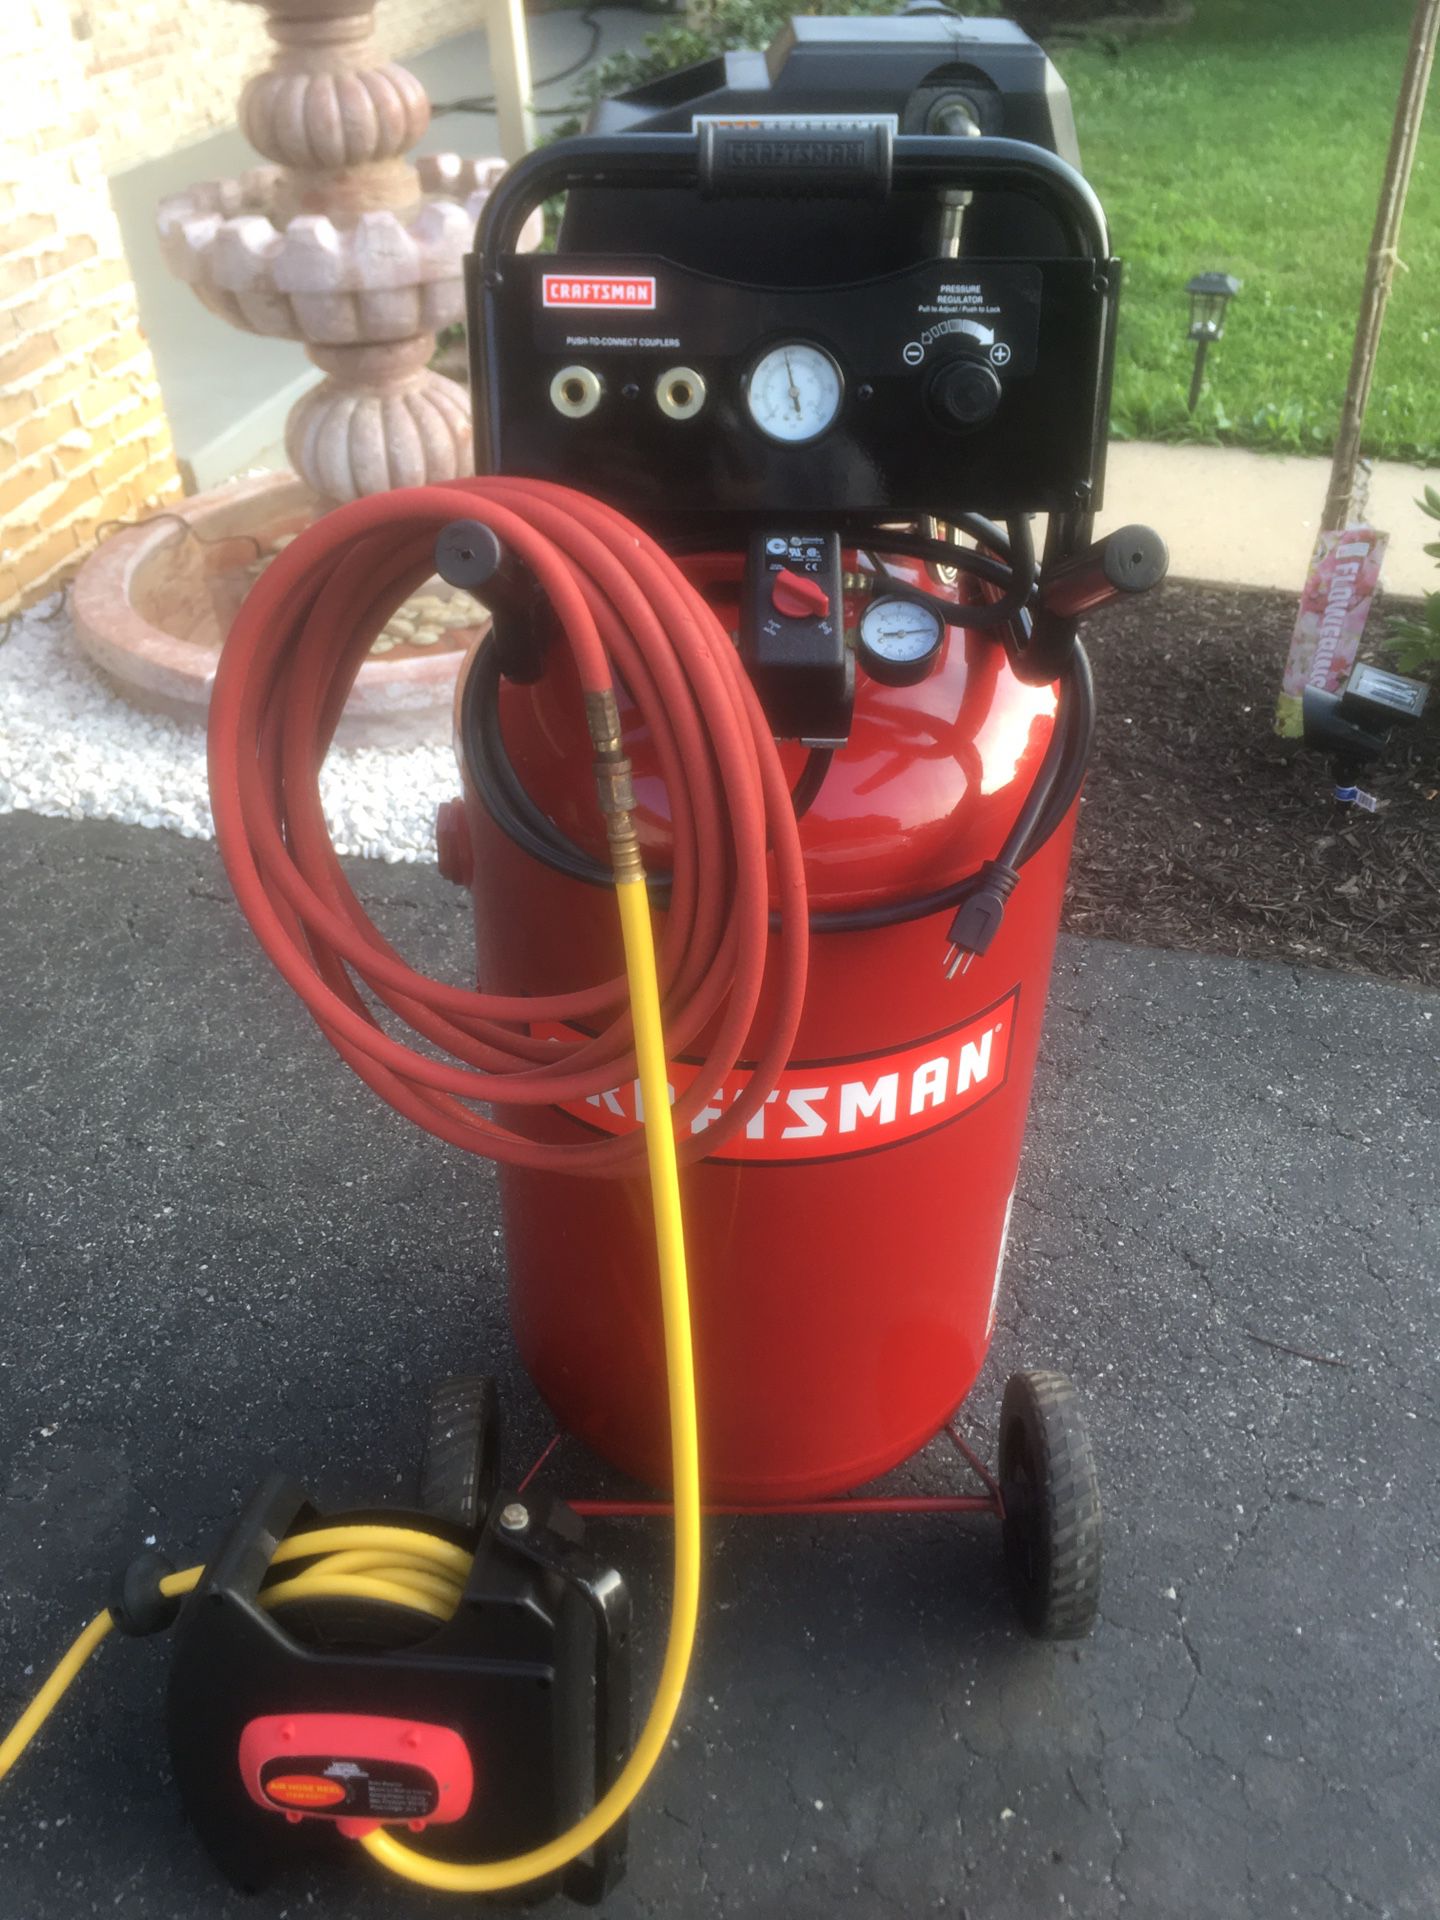 AIR COMPRESSOR CRAFTSMAN-33 Gallons + Air Hose REEL for Sale in Reading, PA  - OfferUp